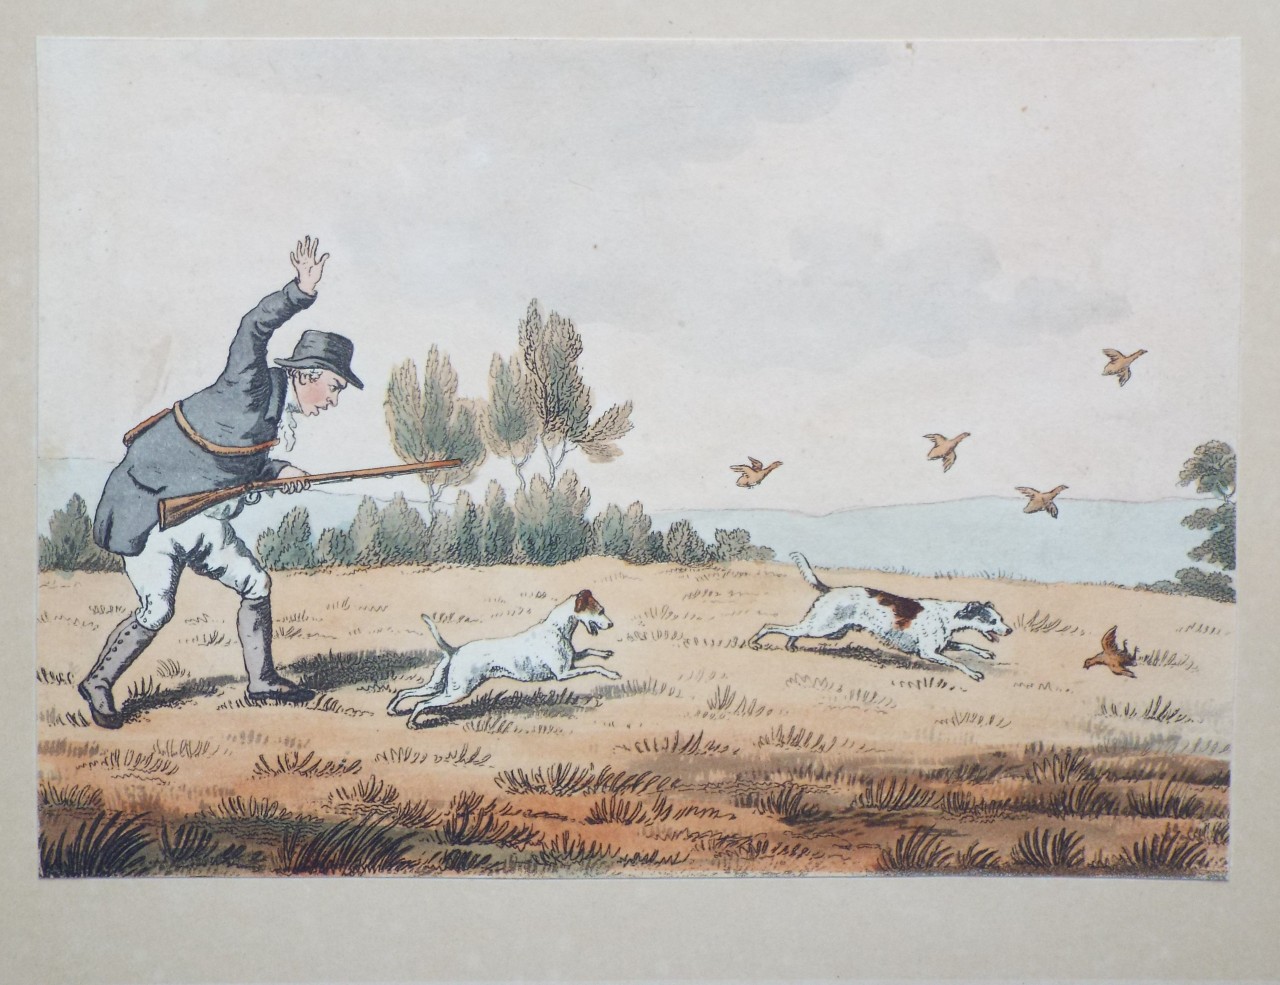 Aquatint - Sportsman raising right arm; dogs approaching wounded bird. - Woodman